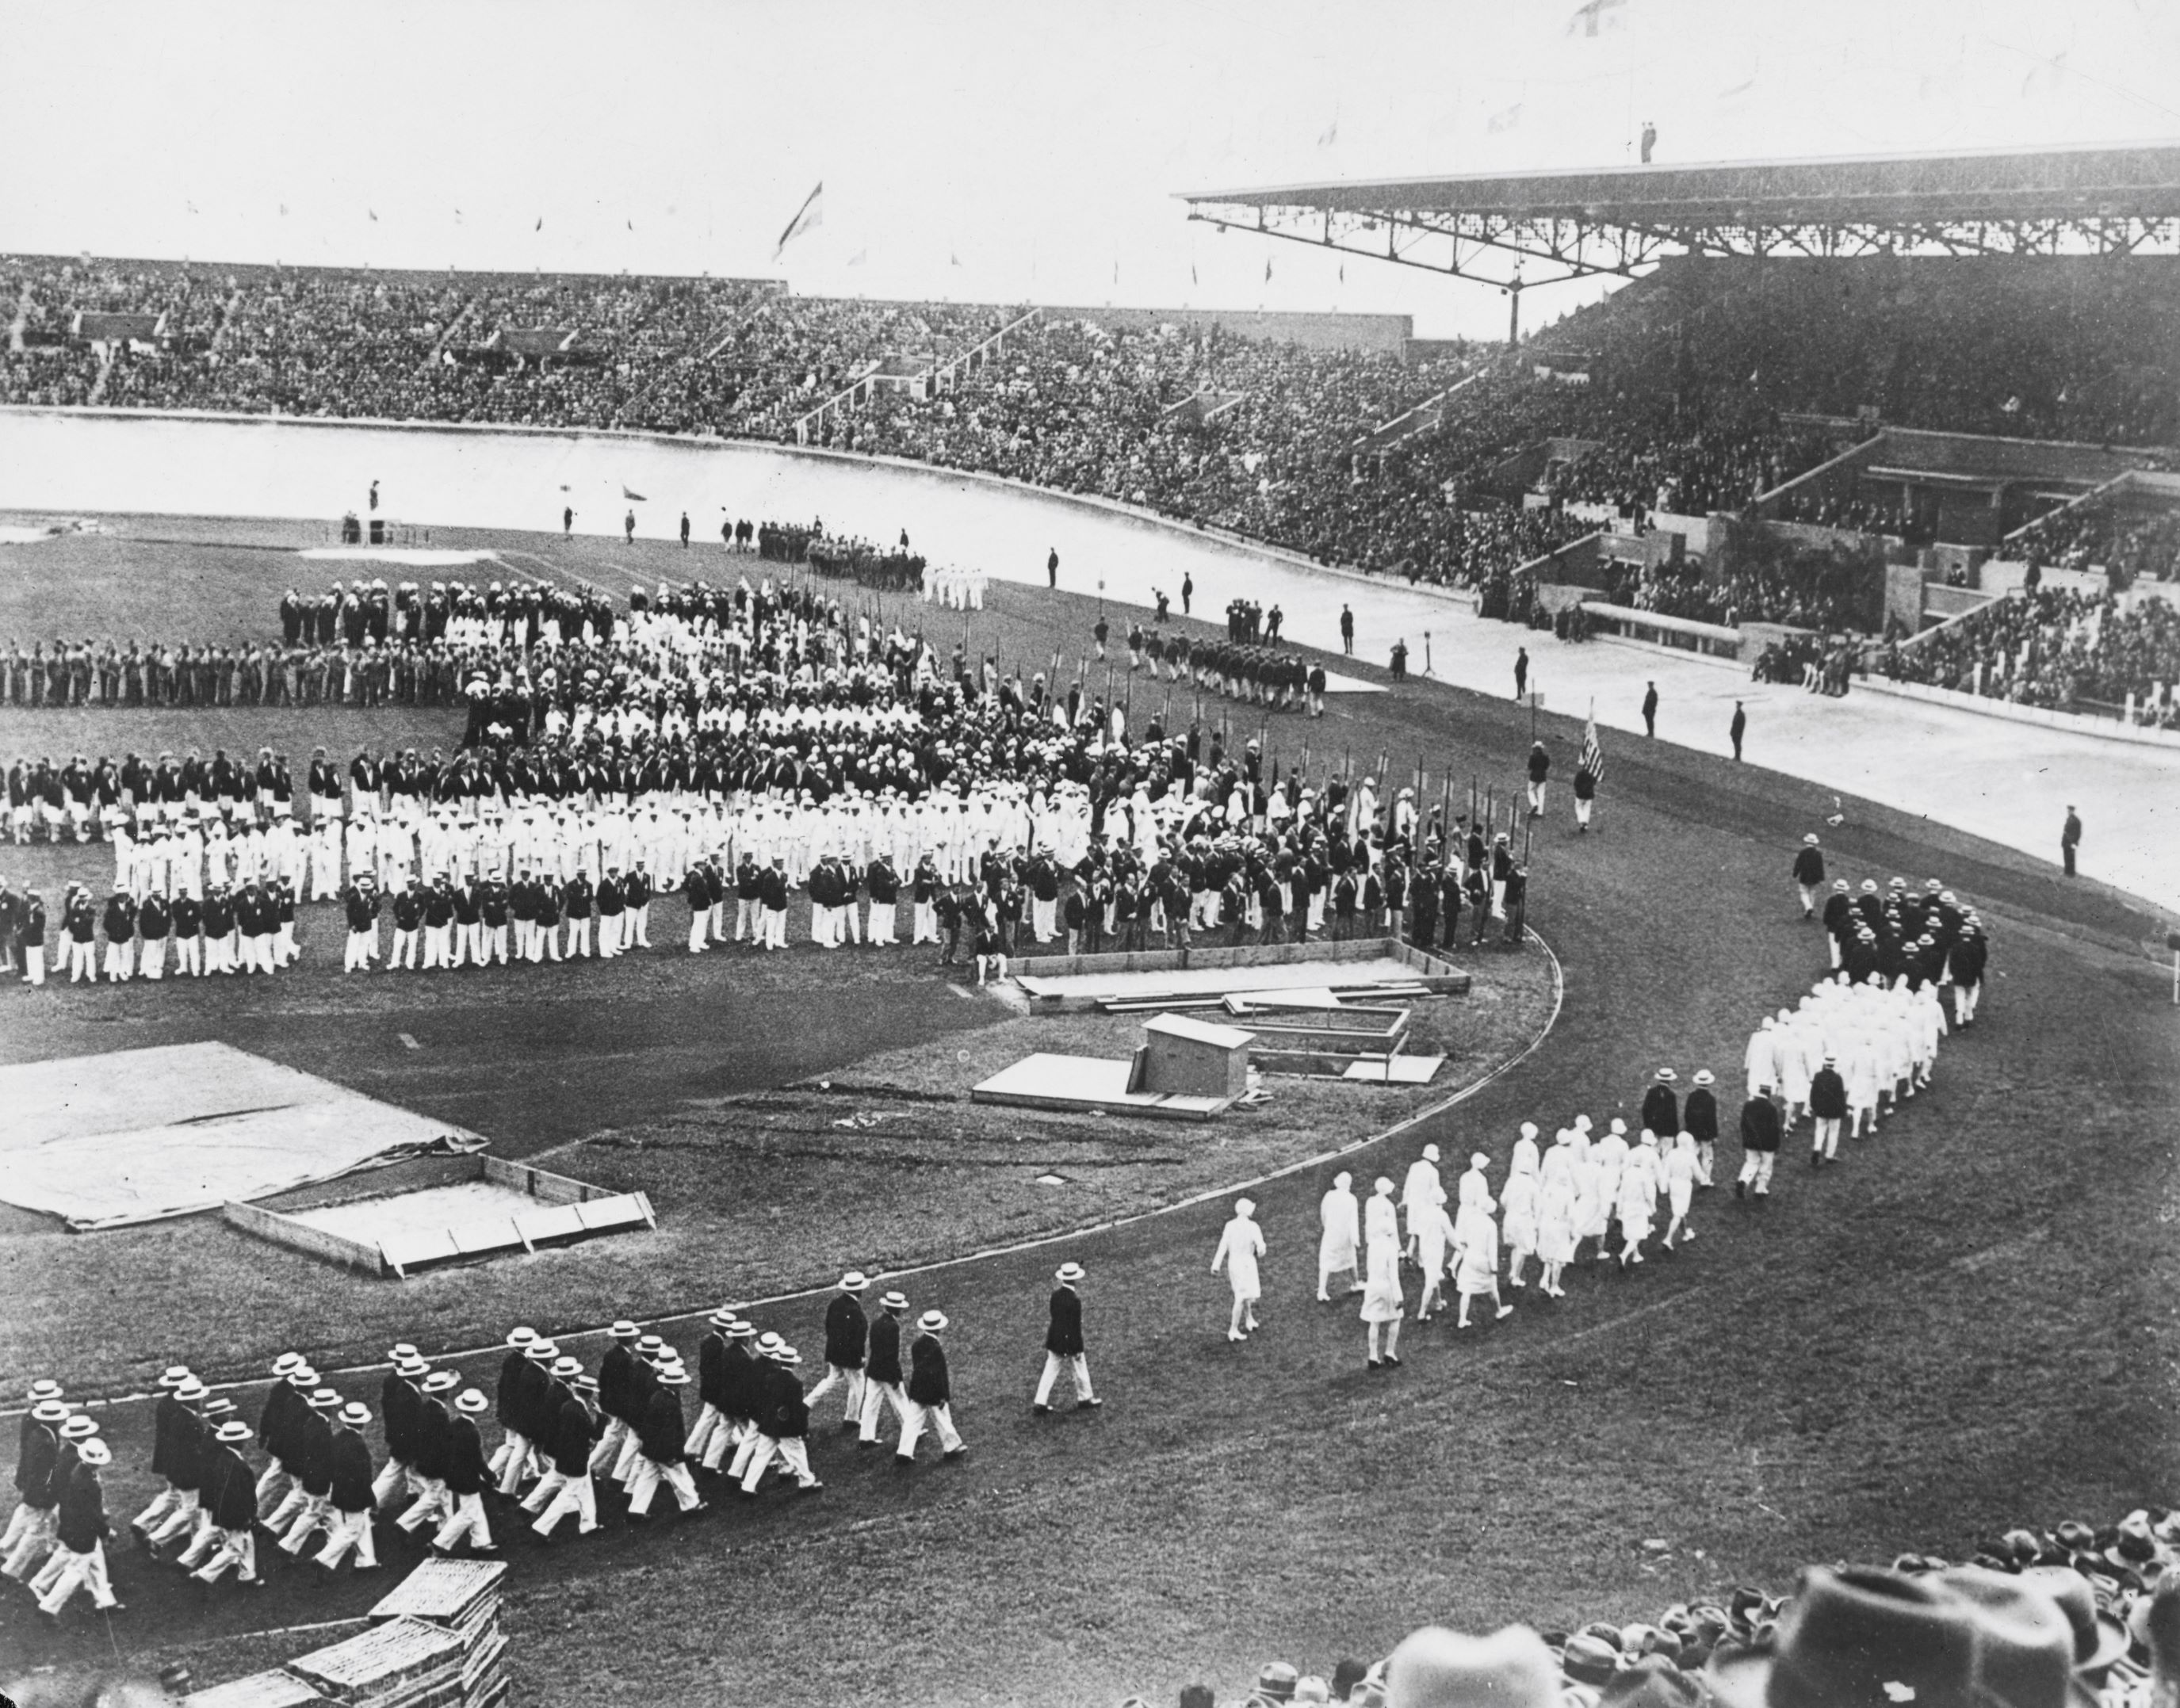 The Paris 1924 Olympic Games